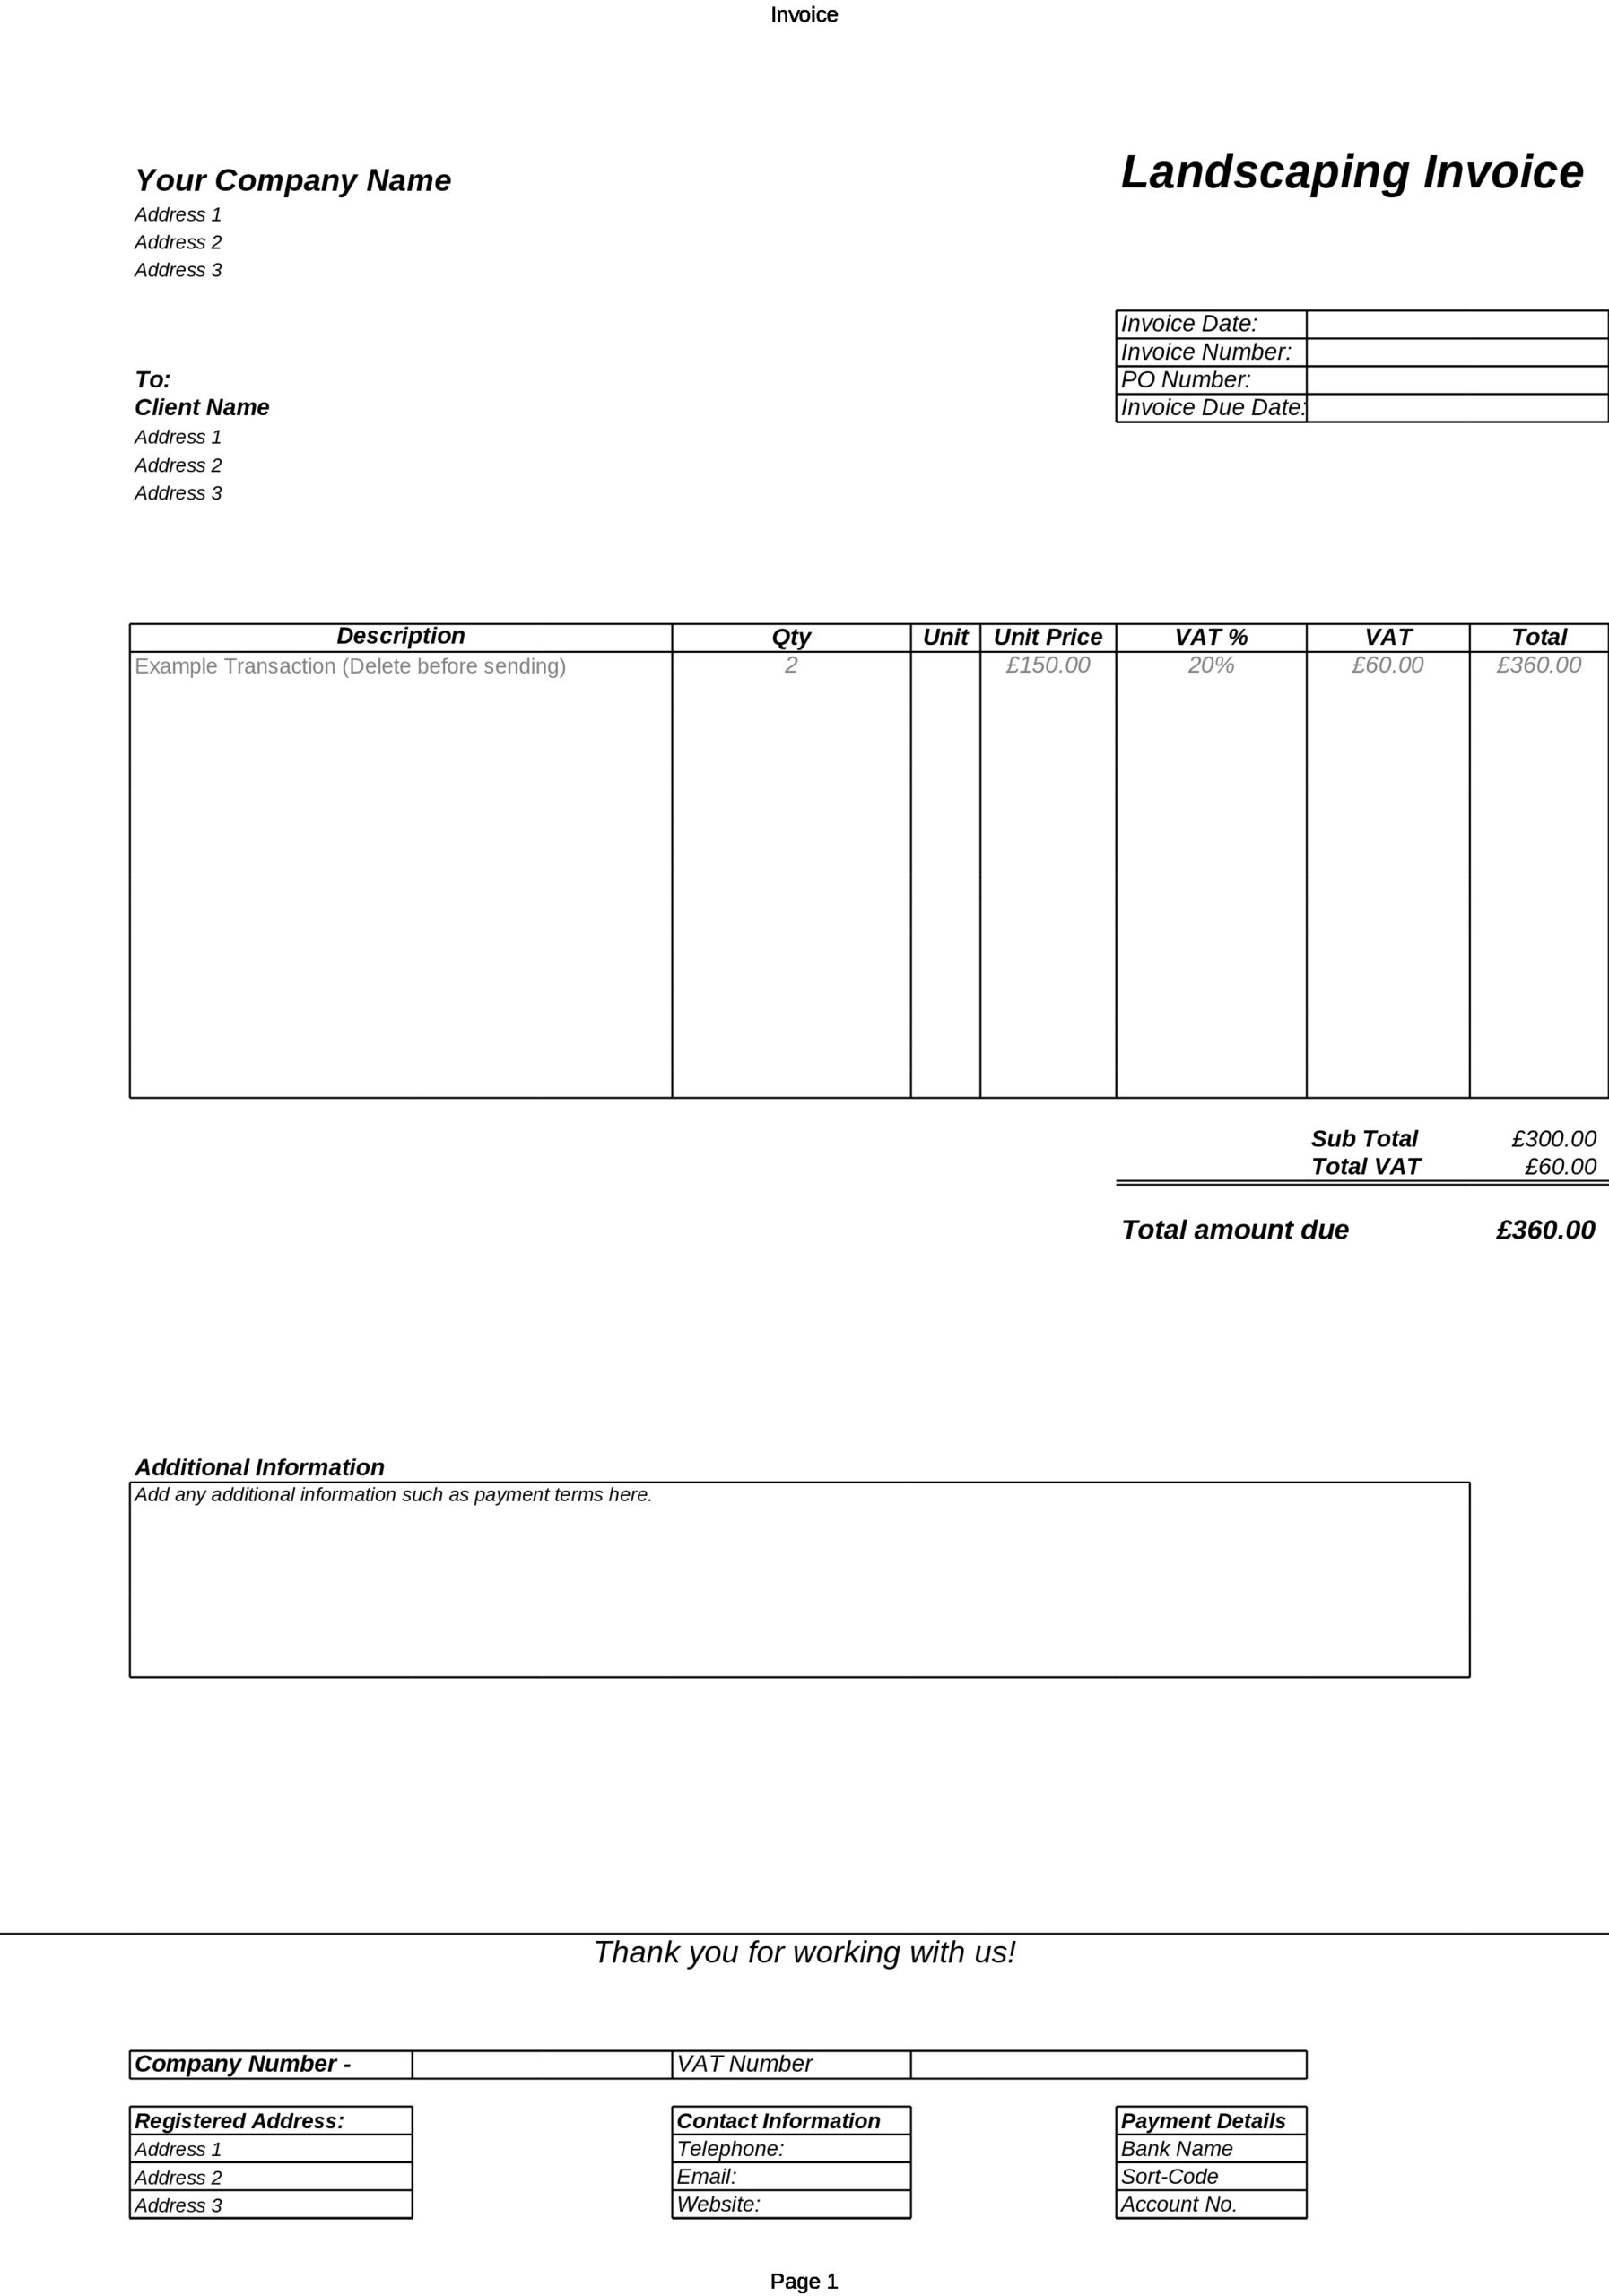 Free landscaping invoice 33